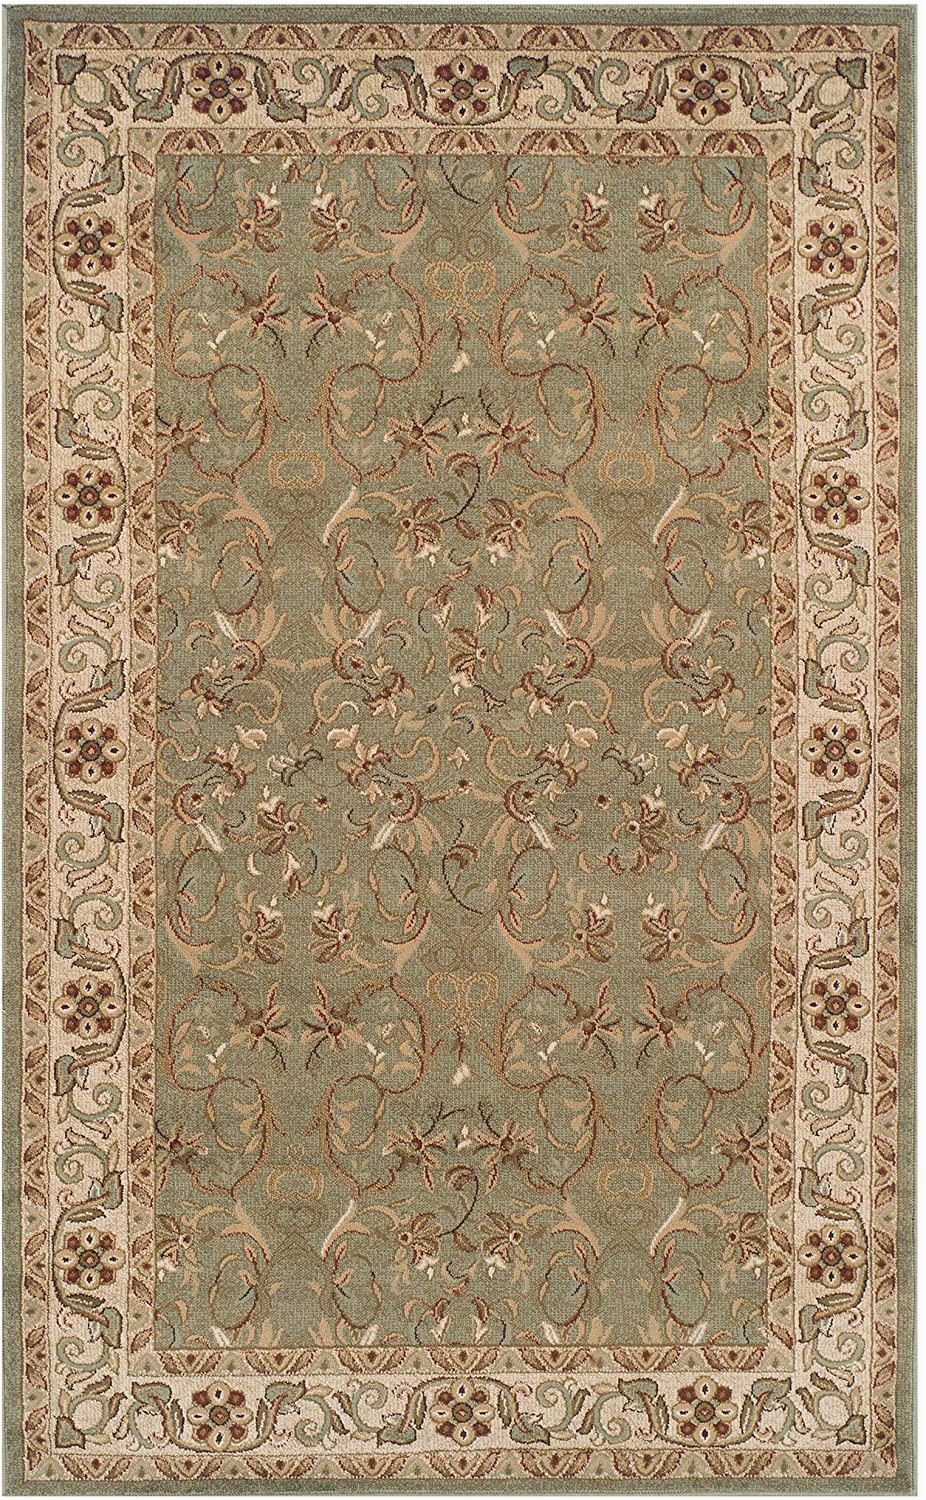 Sage Green area Rug 8×10 Superior Heritage 8 X 10 Green area Rug Contemporary Living Room & Bedroom area Rug Anti Static and Water Repellent for Residential or Mercial